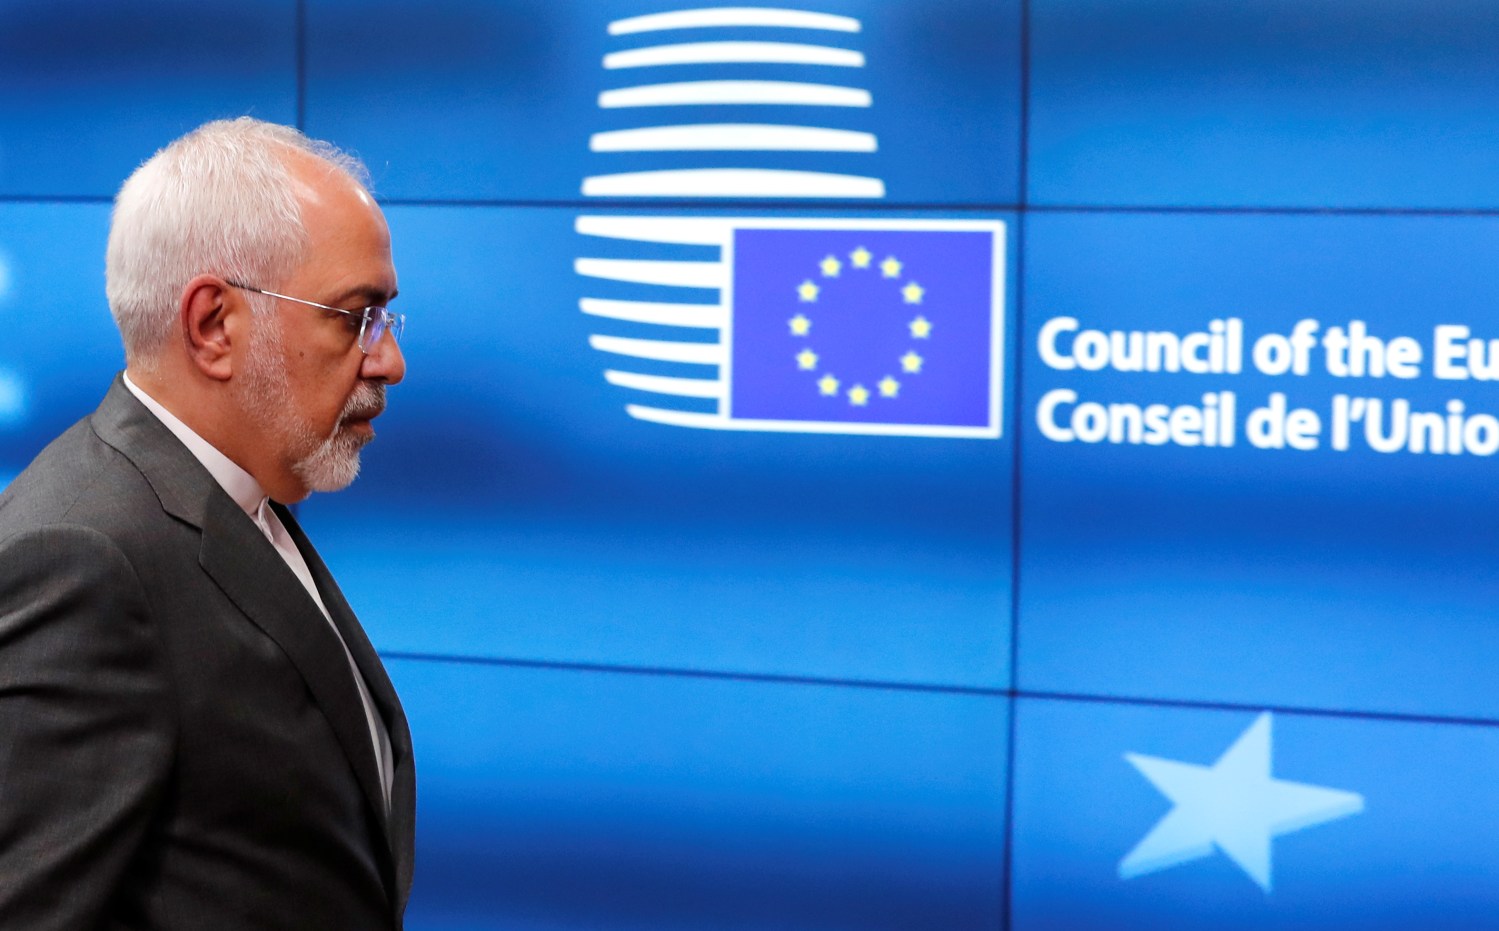 Iran's Foreign Minister Mohammad Javad Zarif arrives at the EU council in Brussels, Belgium May 15, 2018.